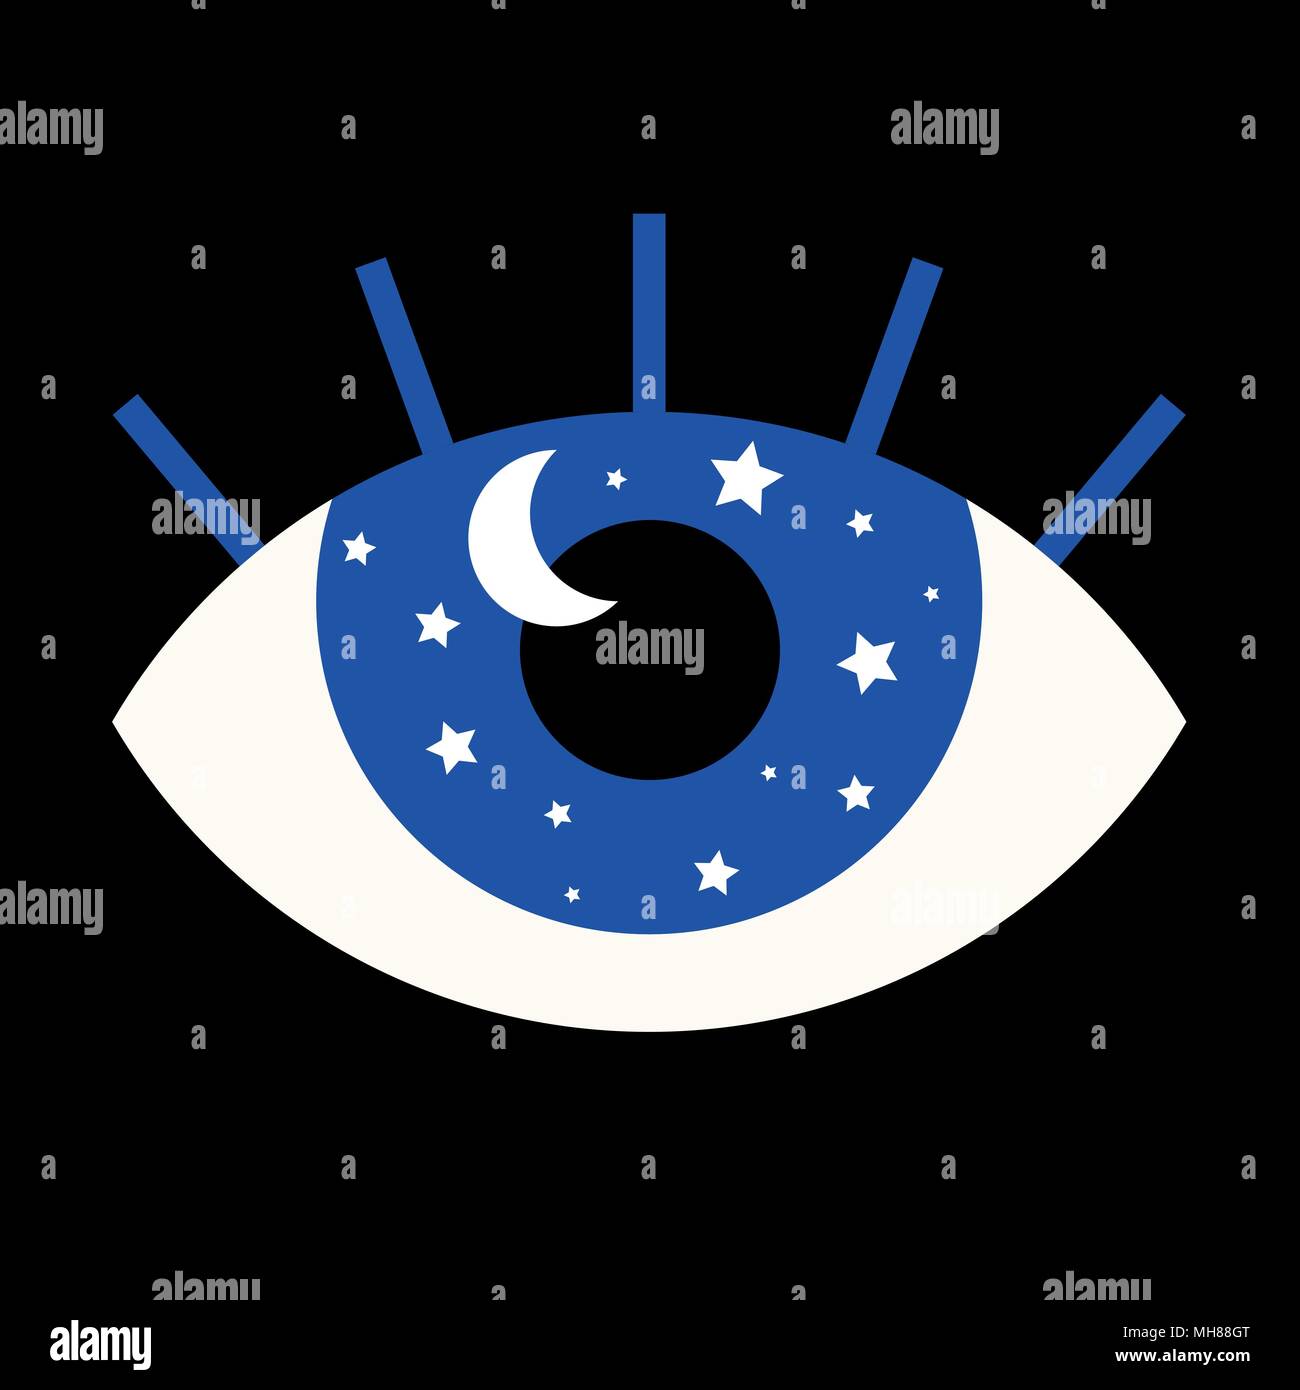 Funny vector illustration of eye with fixed gaze. Inside its pupil there are stars and a moon as a metaphor; eye of the night, the night observes you. Stock Vector